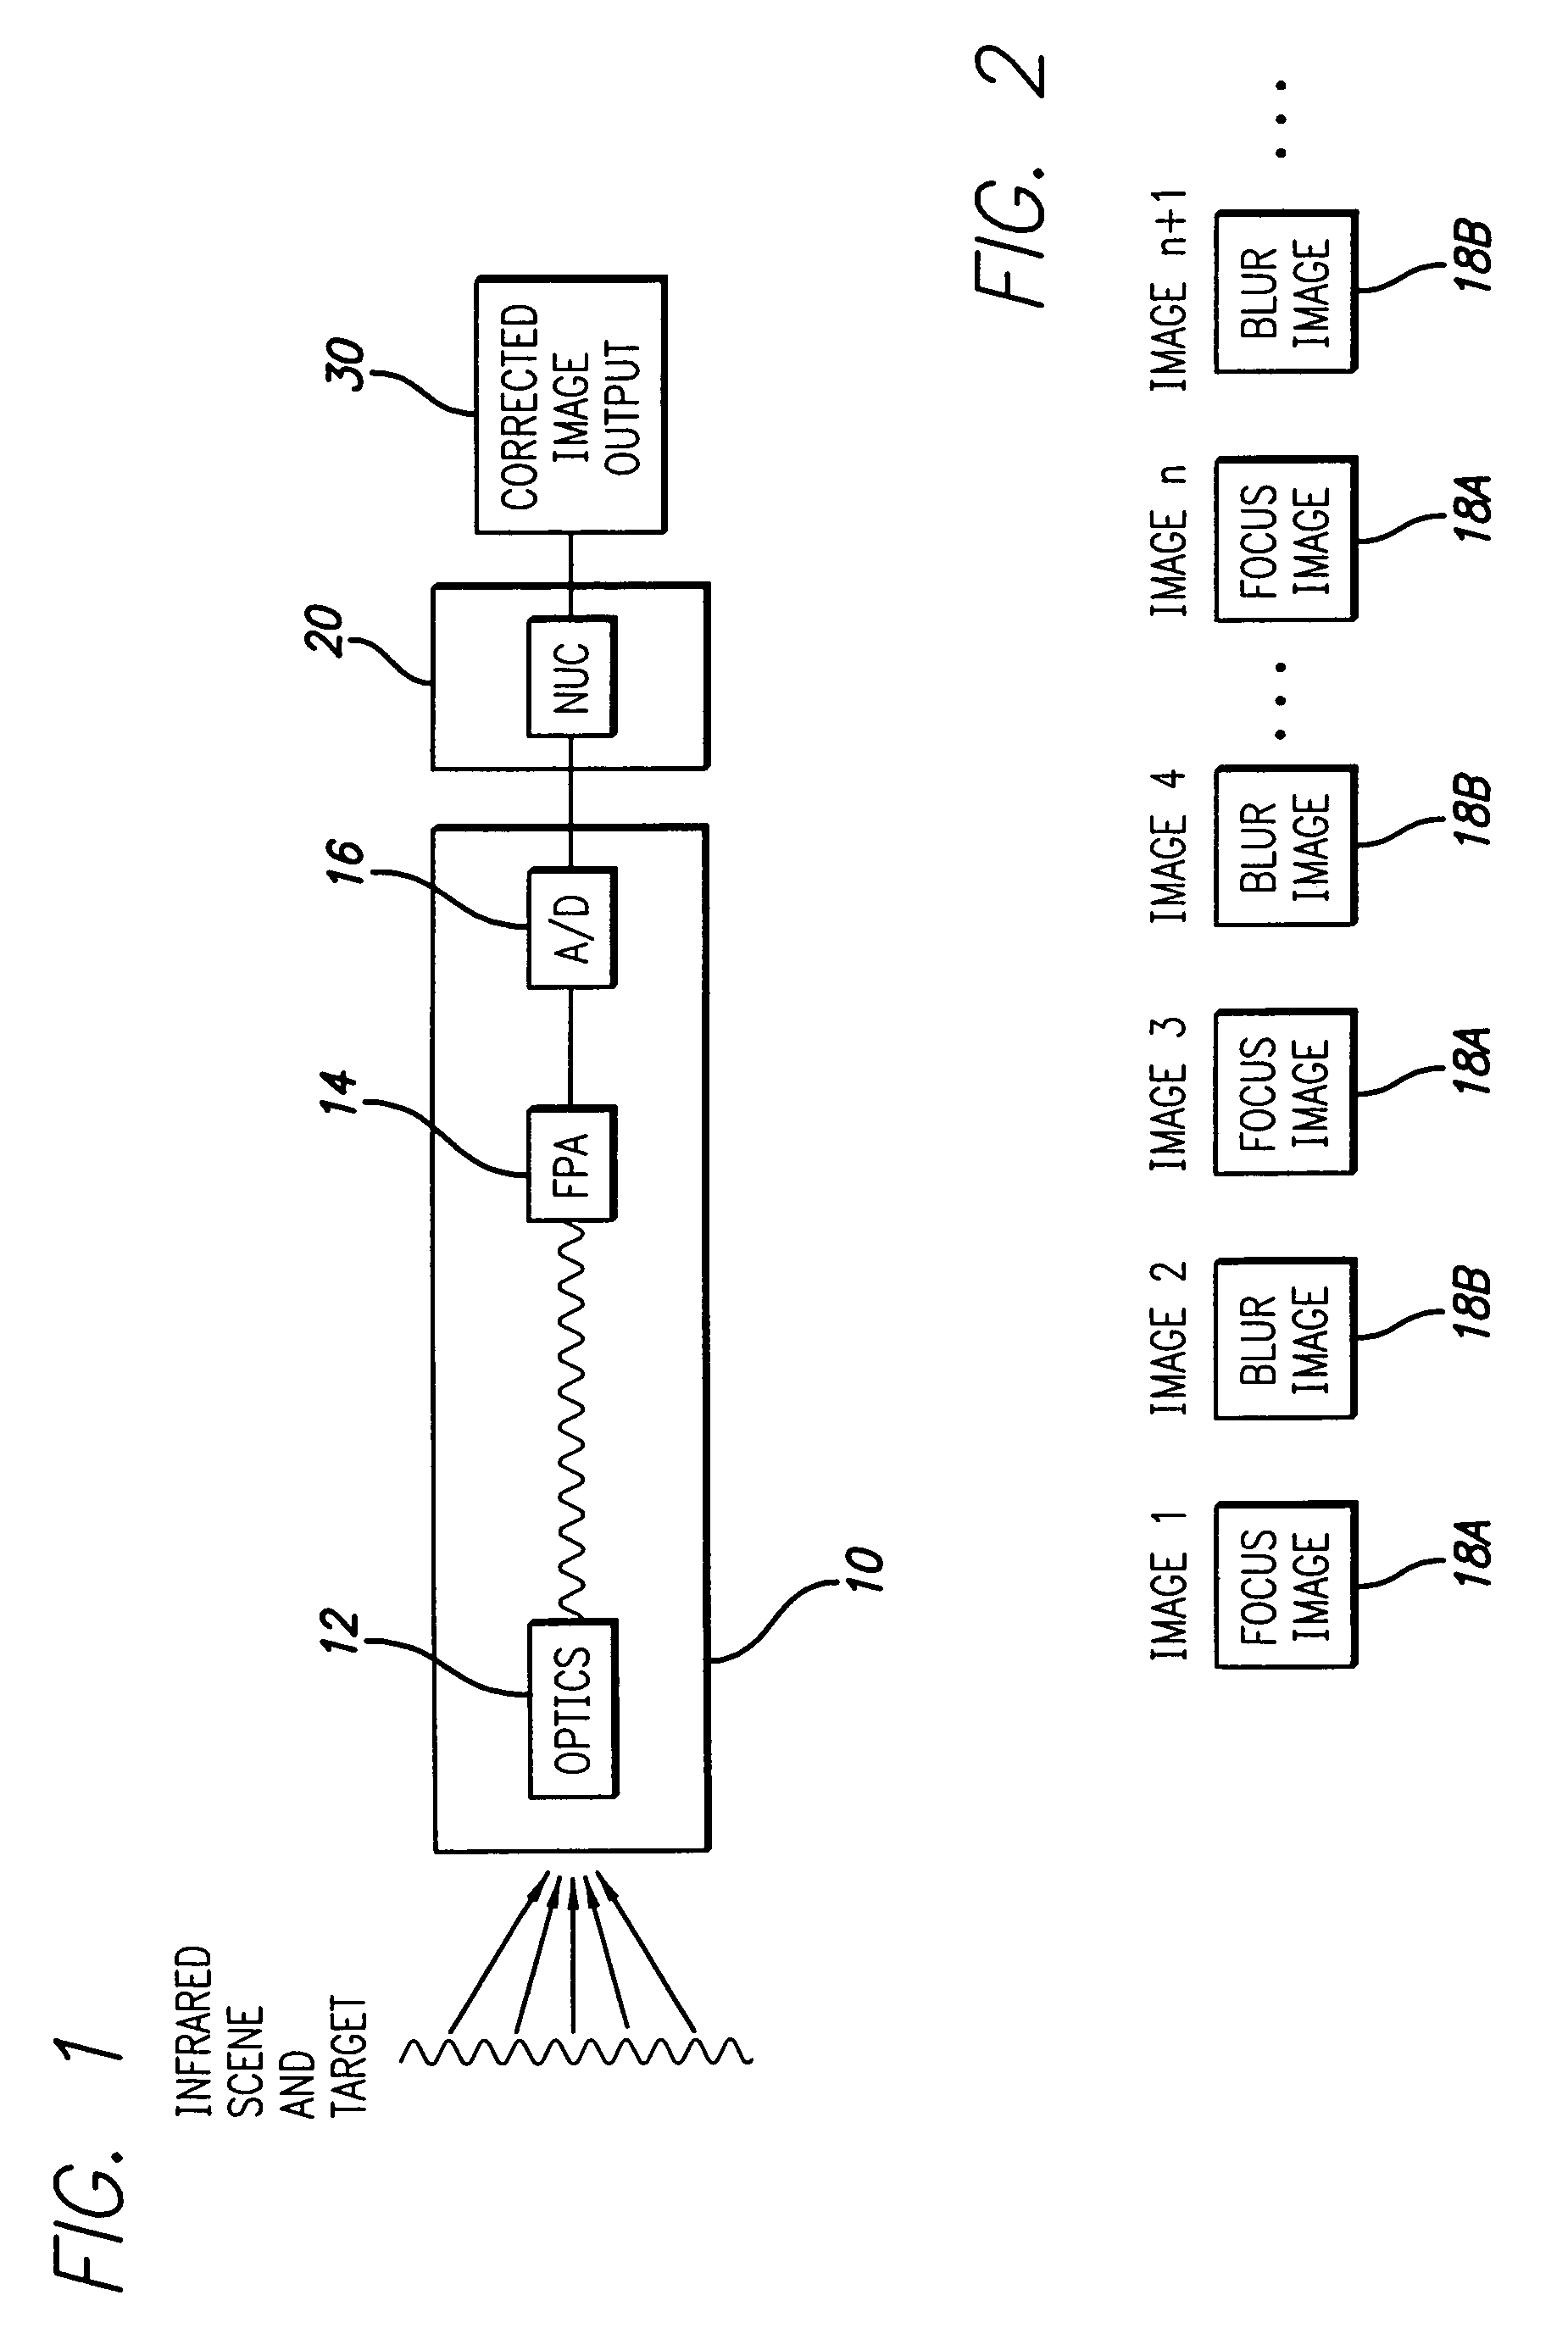 Non-traditional adaptive non-uniformity compensation (ADNUC) system employing adaptive feedforward shunting and operating methods therefor